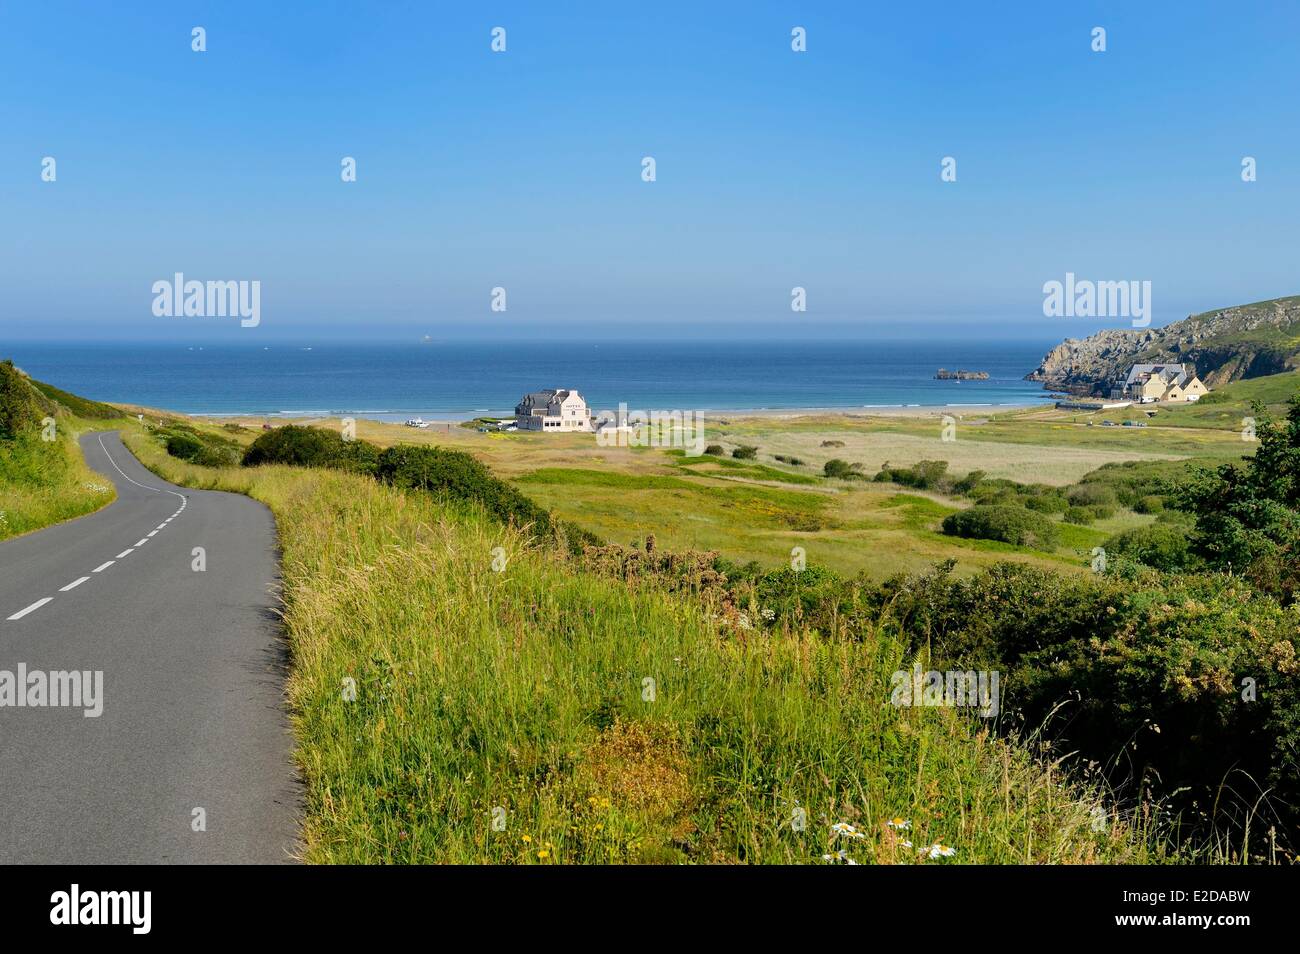 France, Finistere, Iroise Sea, Plogoff, road leading to the beach of the Baie des Trepasses Stock Photo